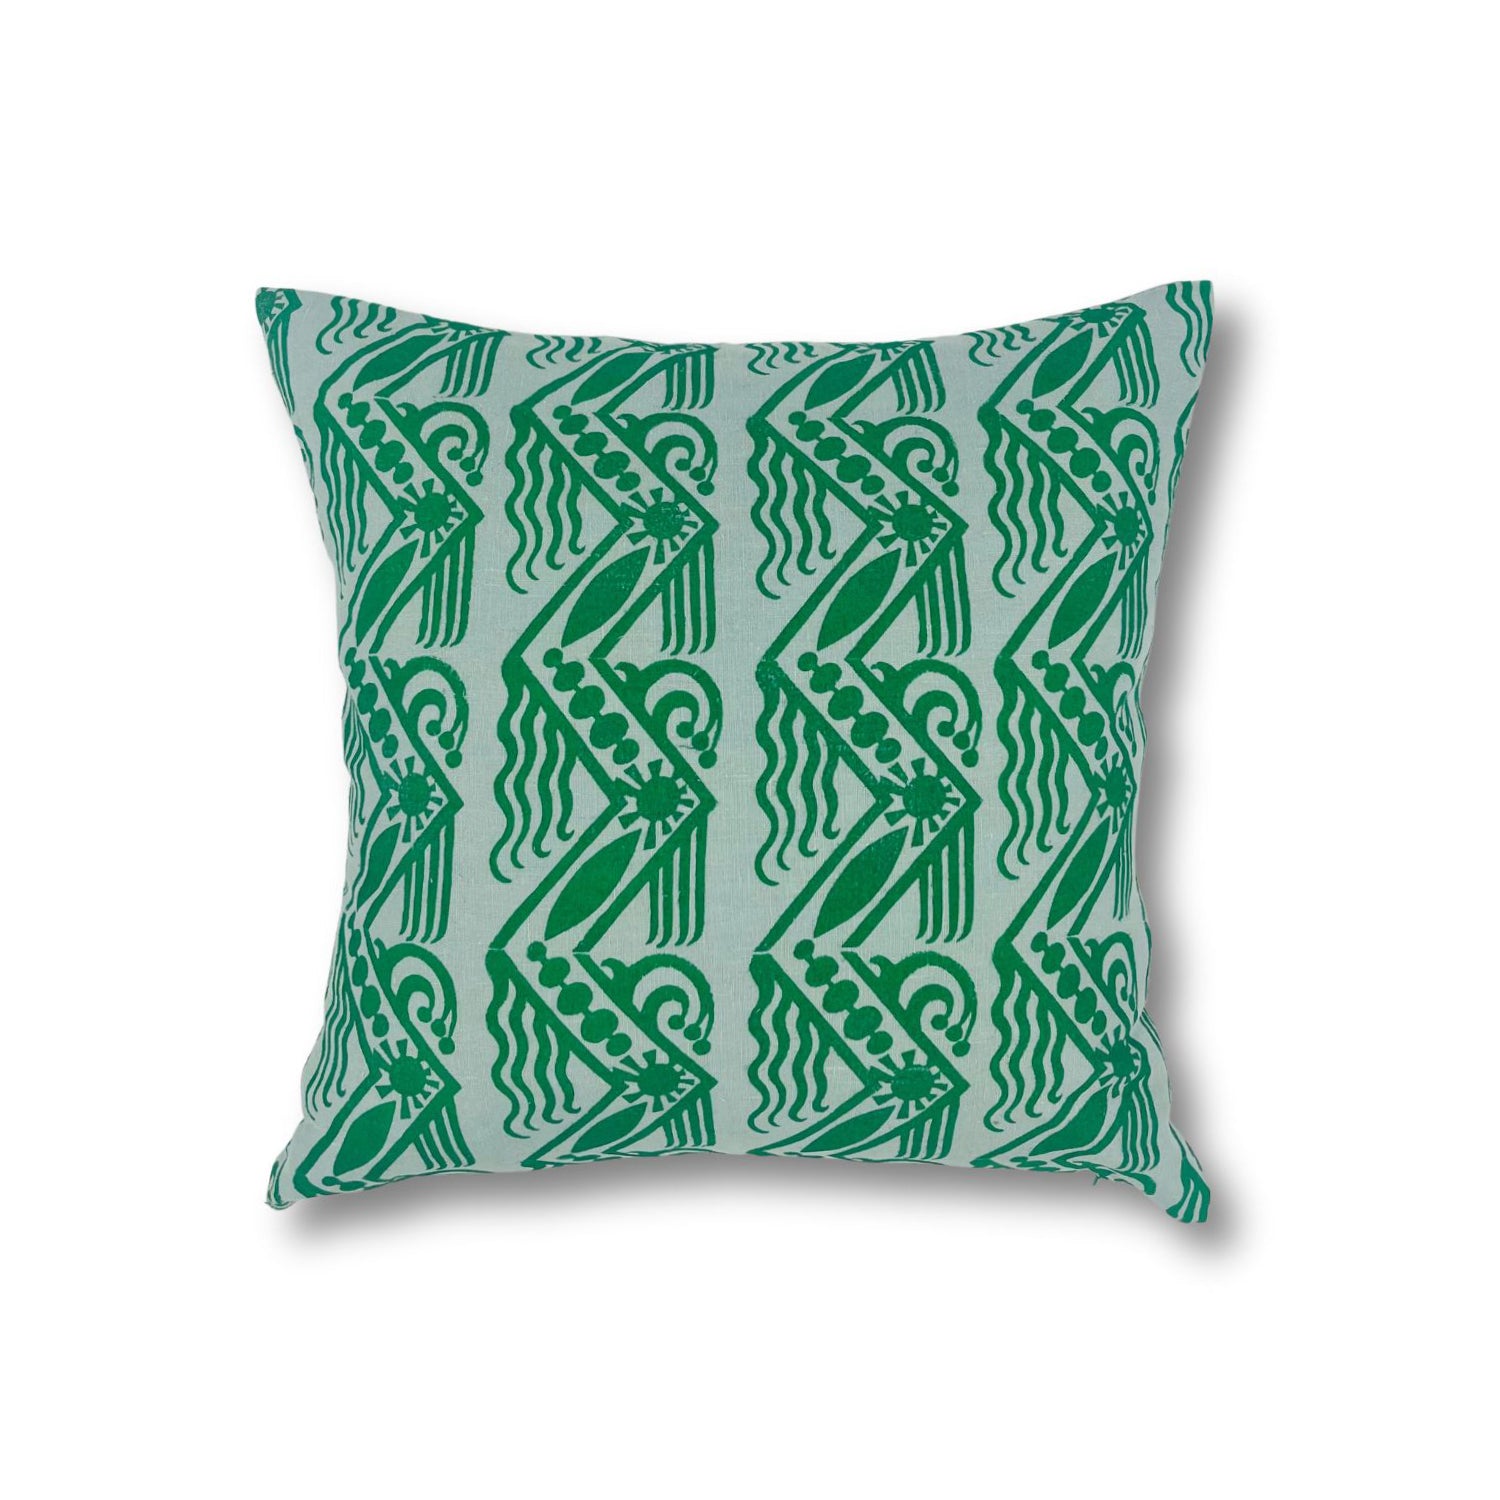 Square throw pillow in a repeating linear block print pattern in green on a mint field.